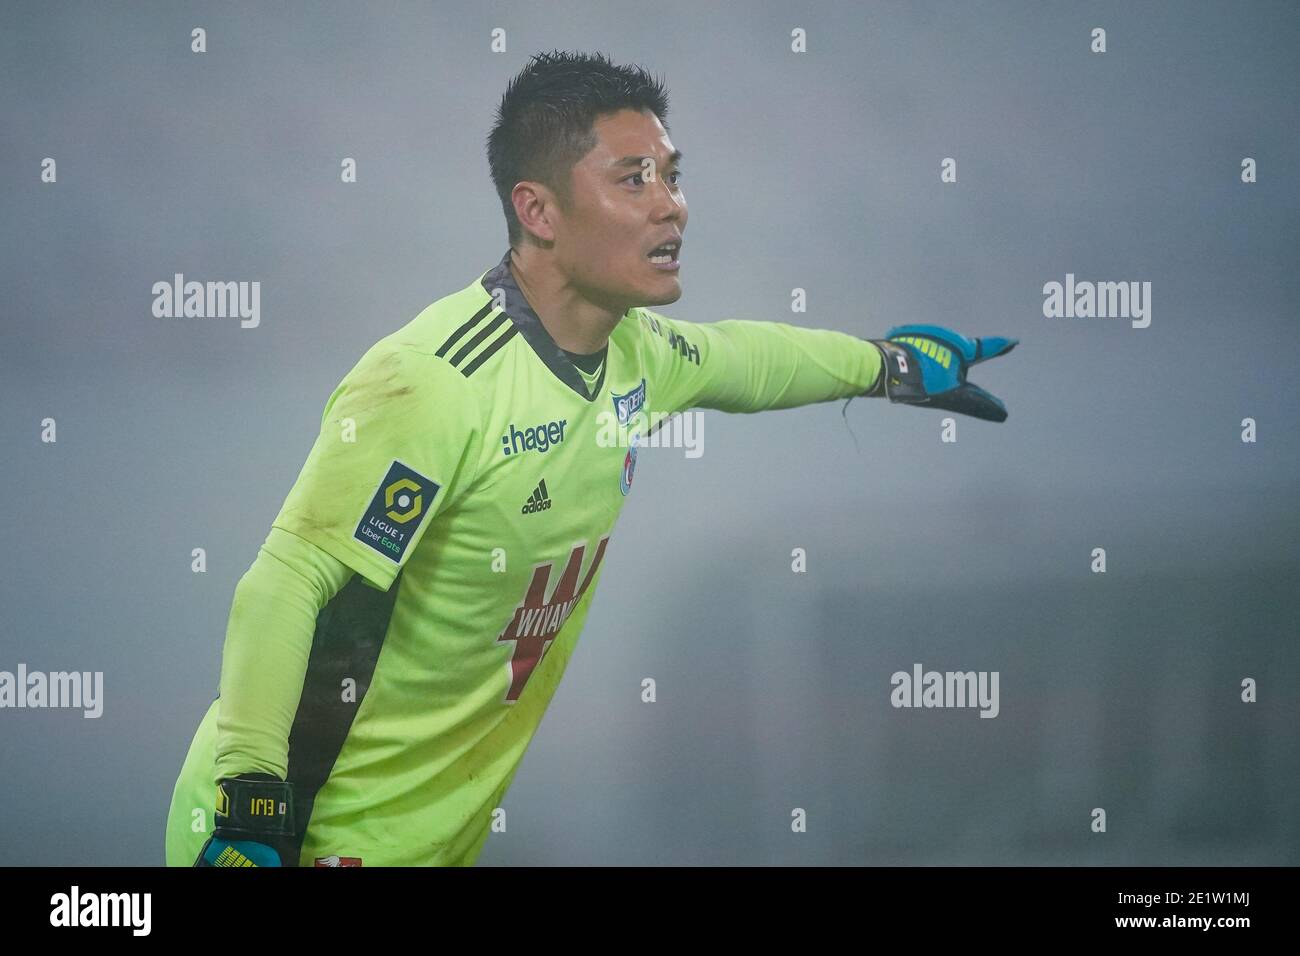 LENS, NETHERLANDS - JANUARY 9: L-R: Eiji Kawashima of RC Strasbourg during the Ligue 1 match between RC Lens and RC Strasbourg at Stade Bollaert-Delelis on January 9, 2021 in Lens, Netherlands (Photo by Jeroen Meuwsen/BSR AgencyOrange PicturesAlamy Live News) Stock Photo